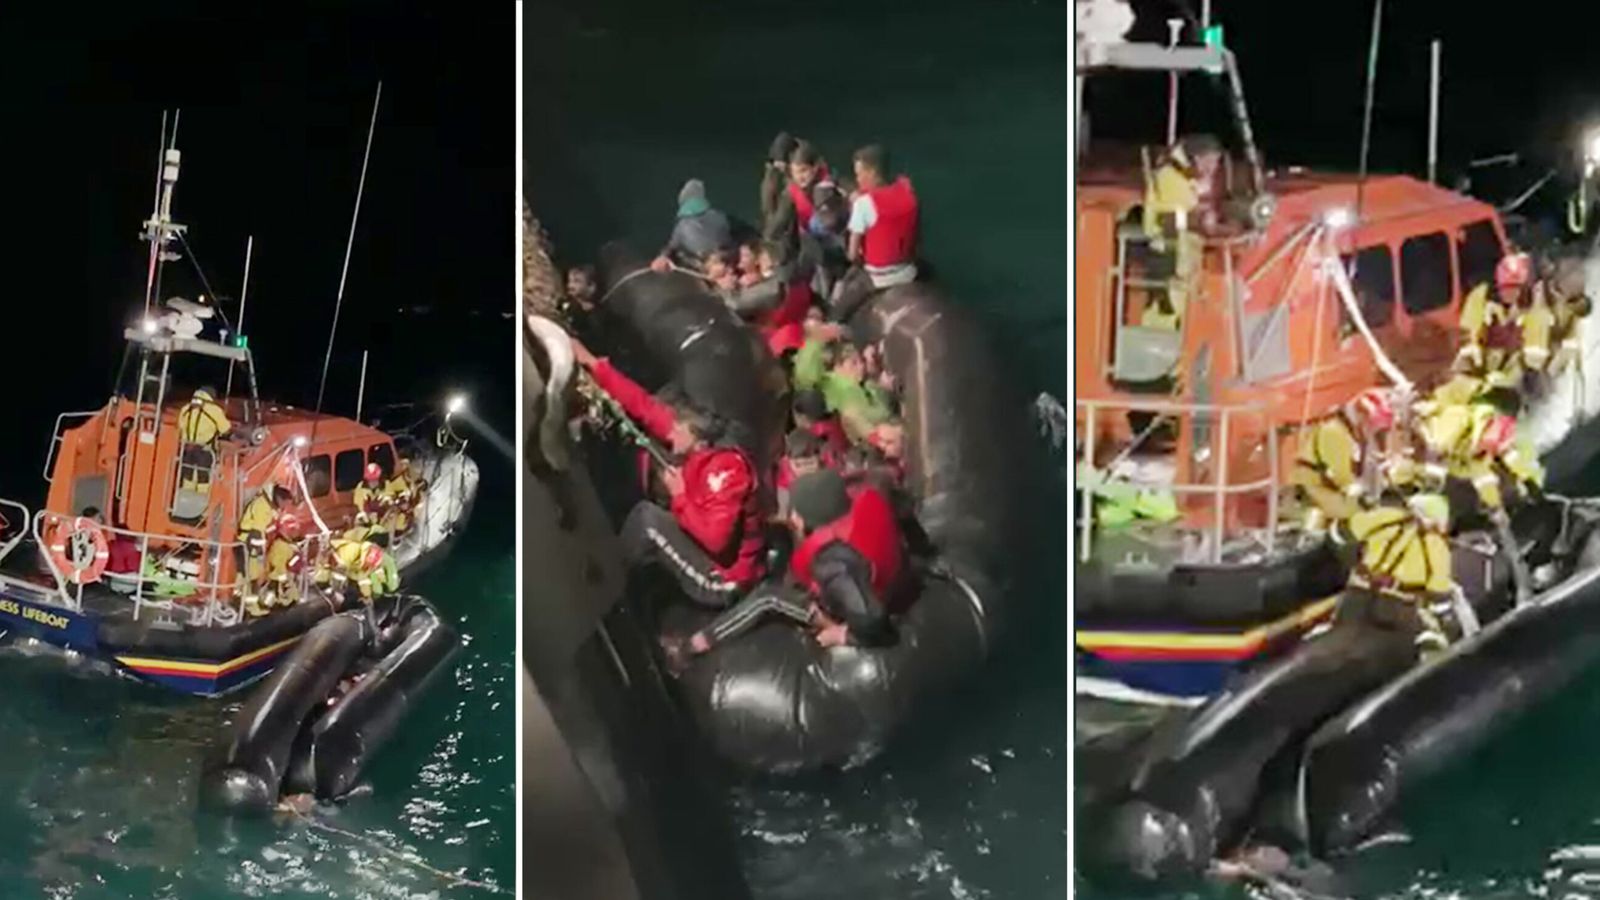 Search for migrants in freezing Channel continues after four confirmed dead and 39 others rescued as boat capsizes